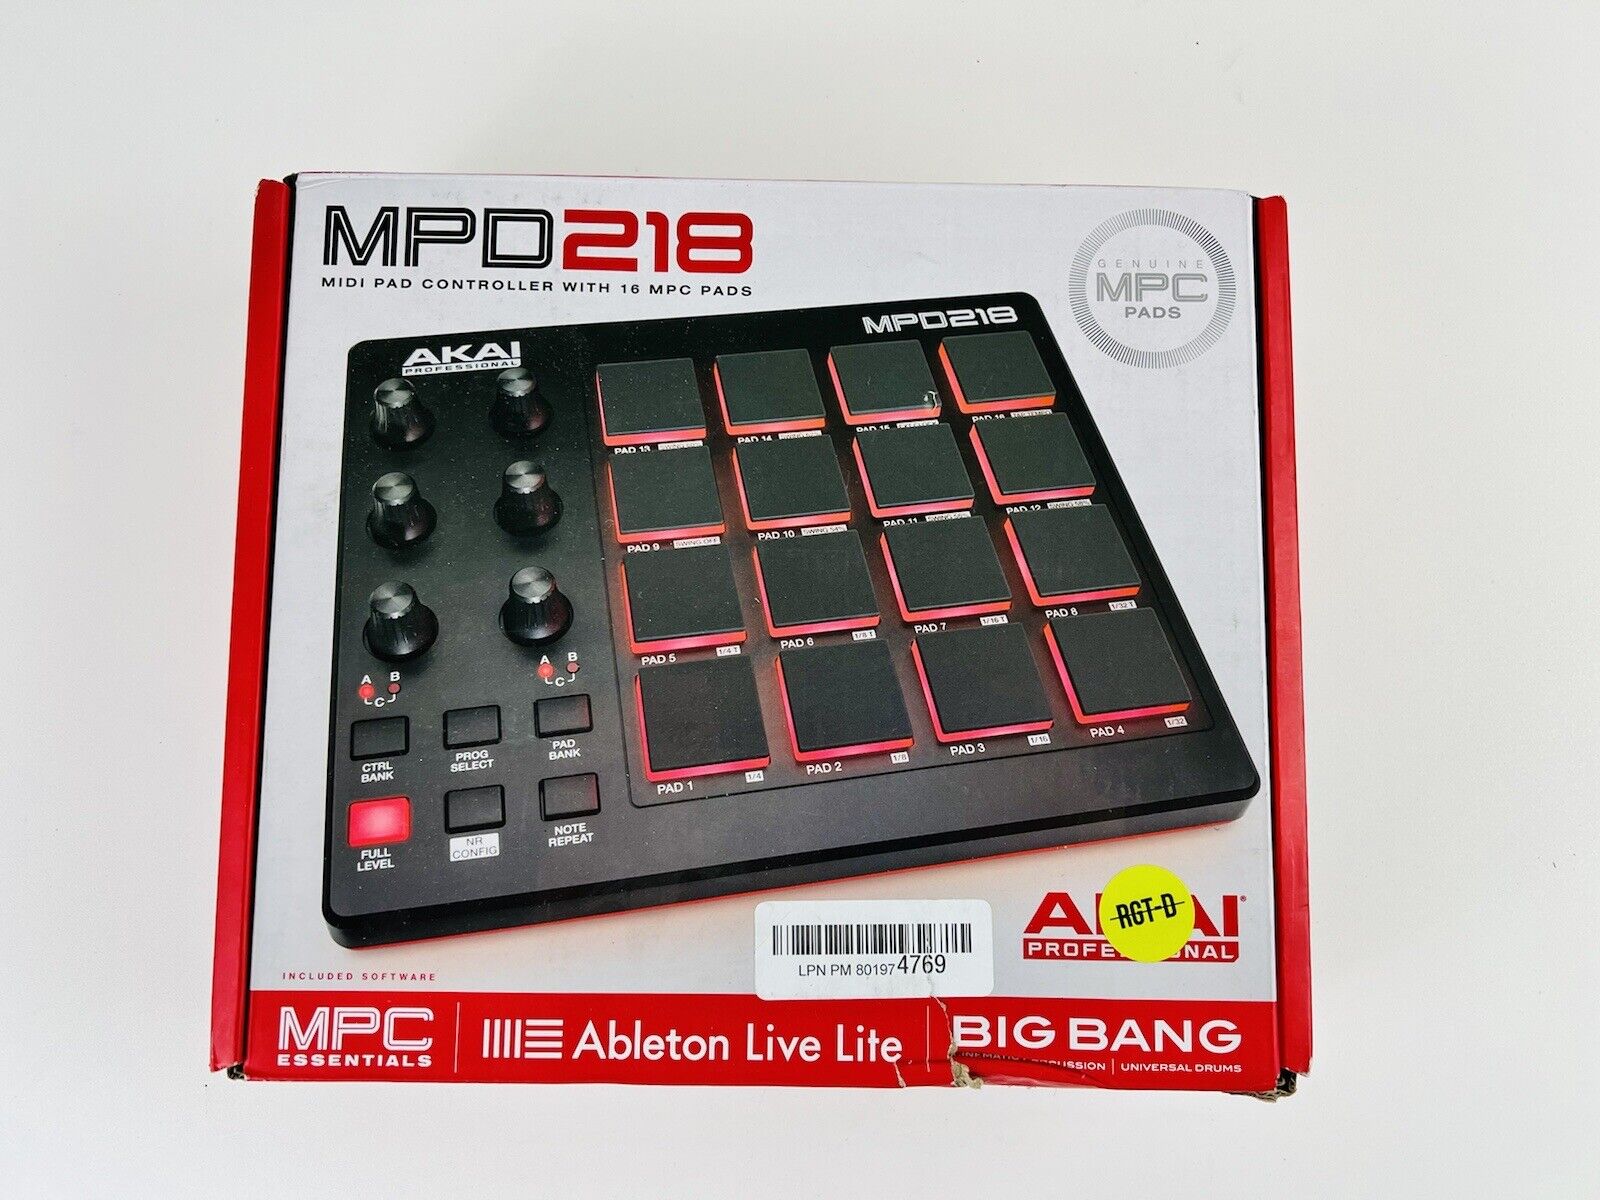 How To Use The Williams Allegro 2 As A MIDI Controller Using The Akai Professional MPD218